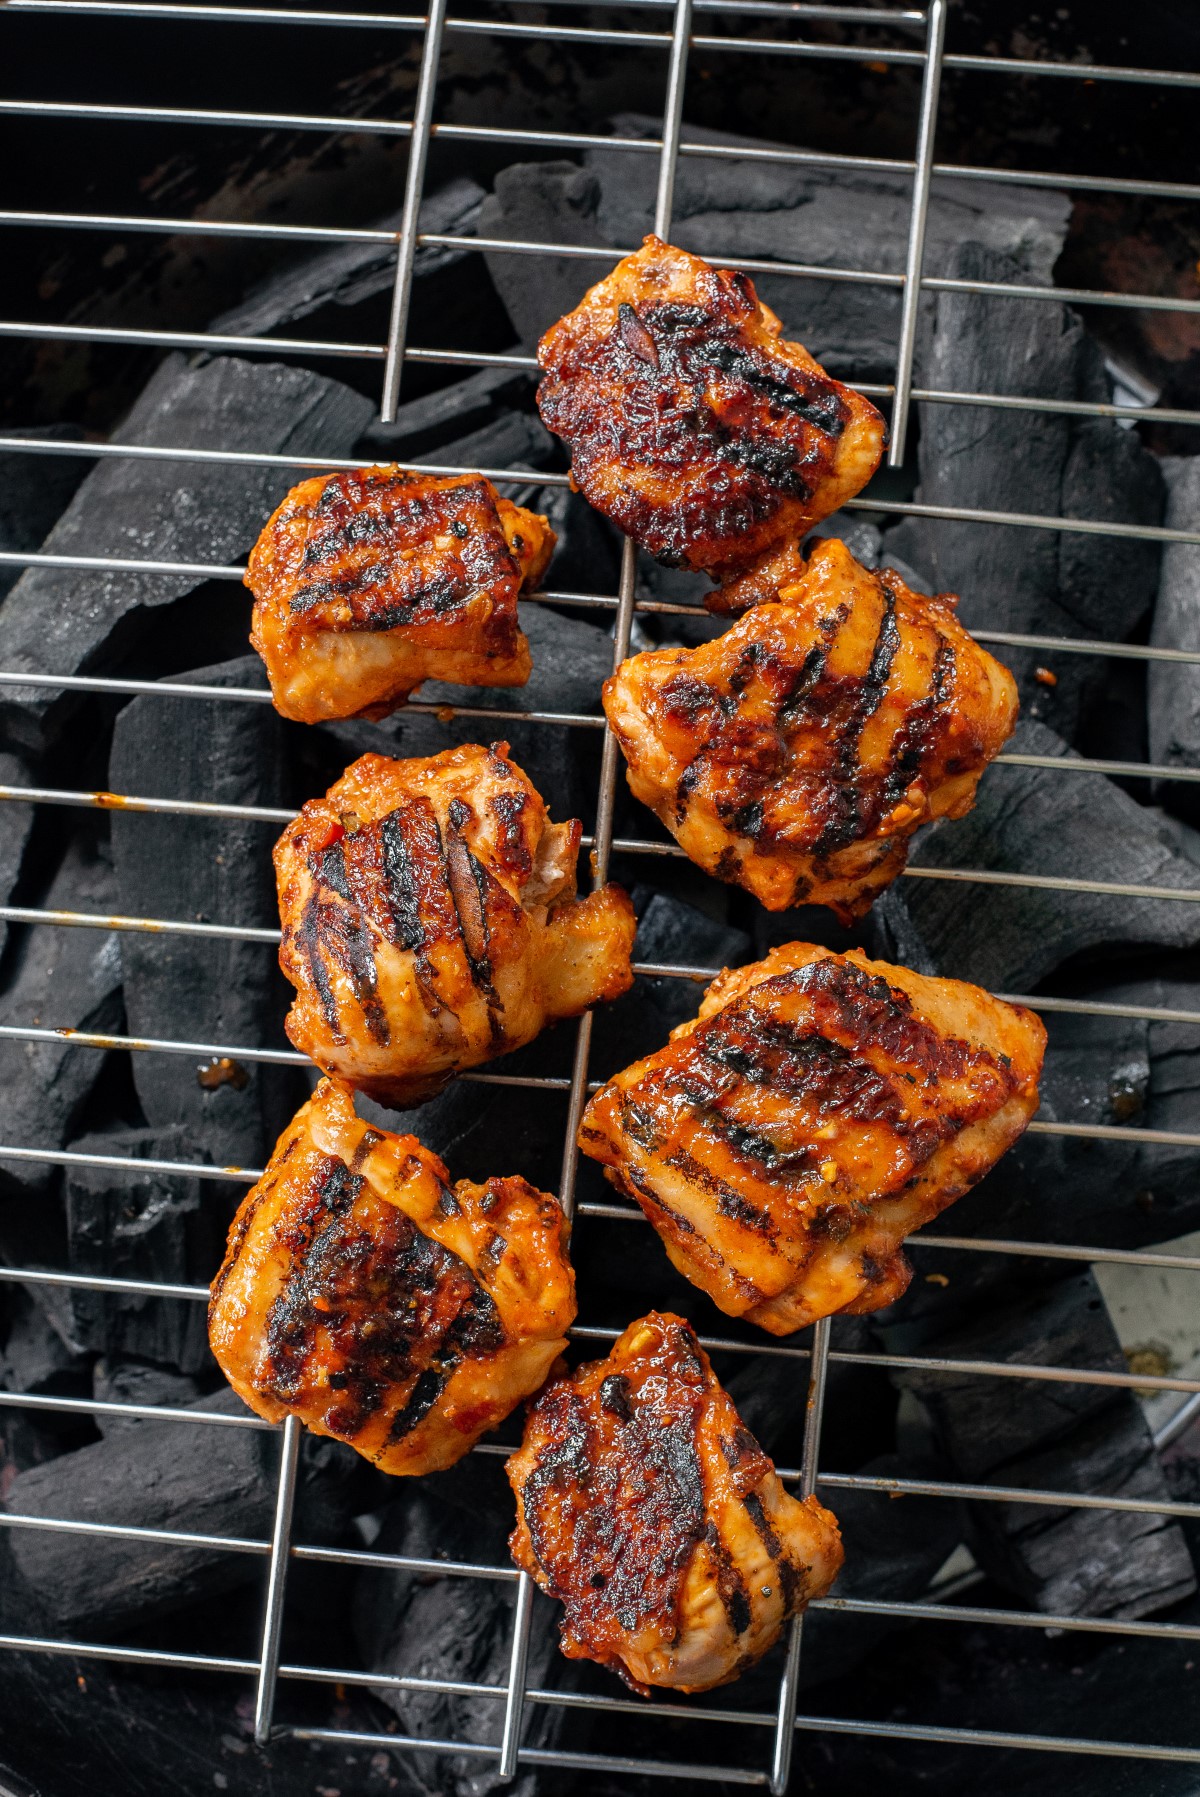 Harissa chicken thighs cooking on the grill.